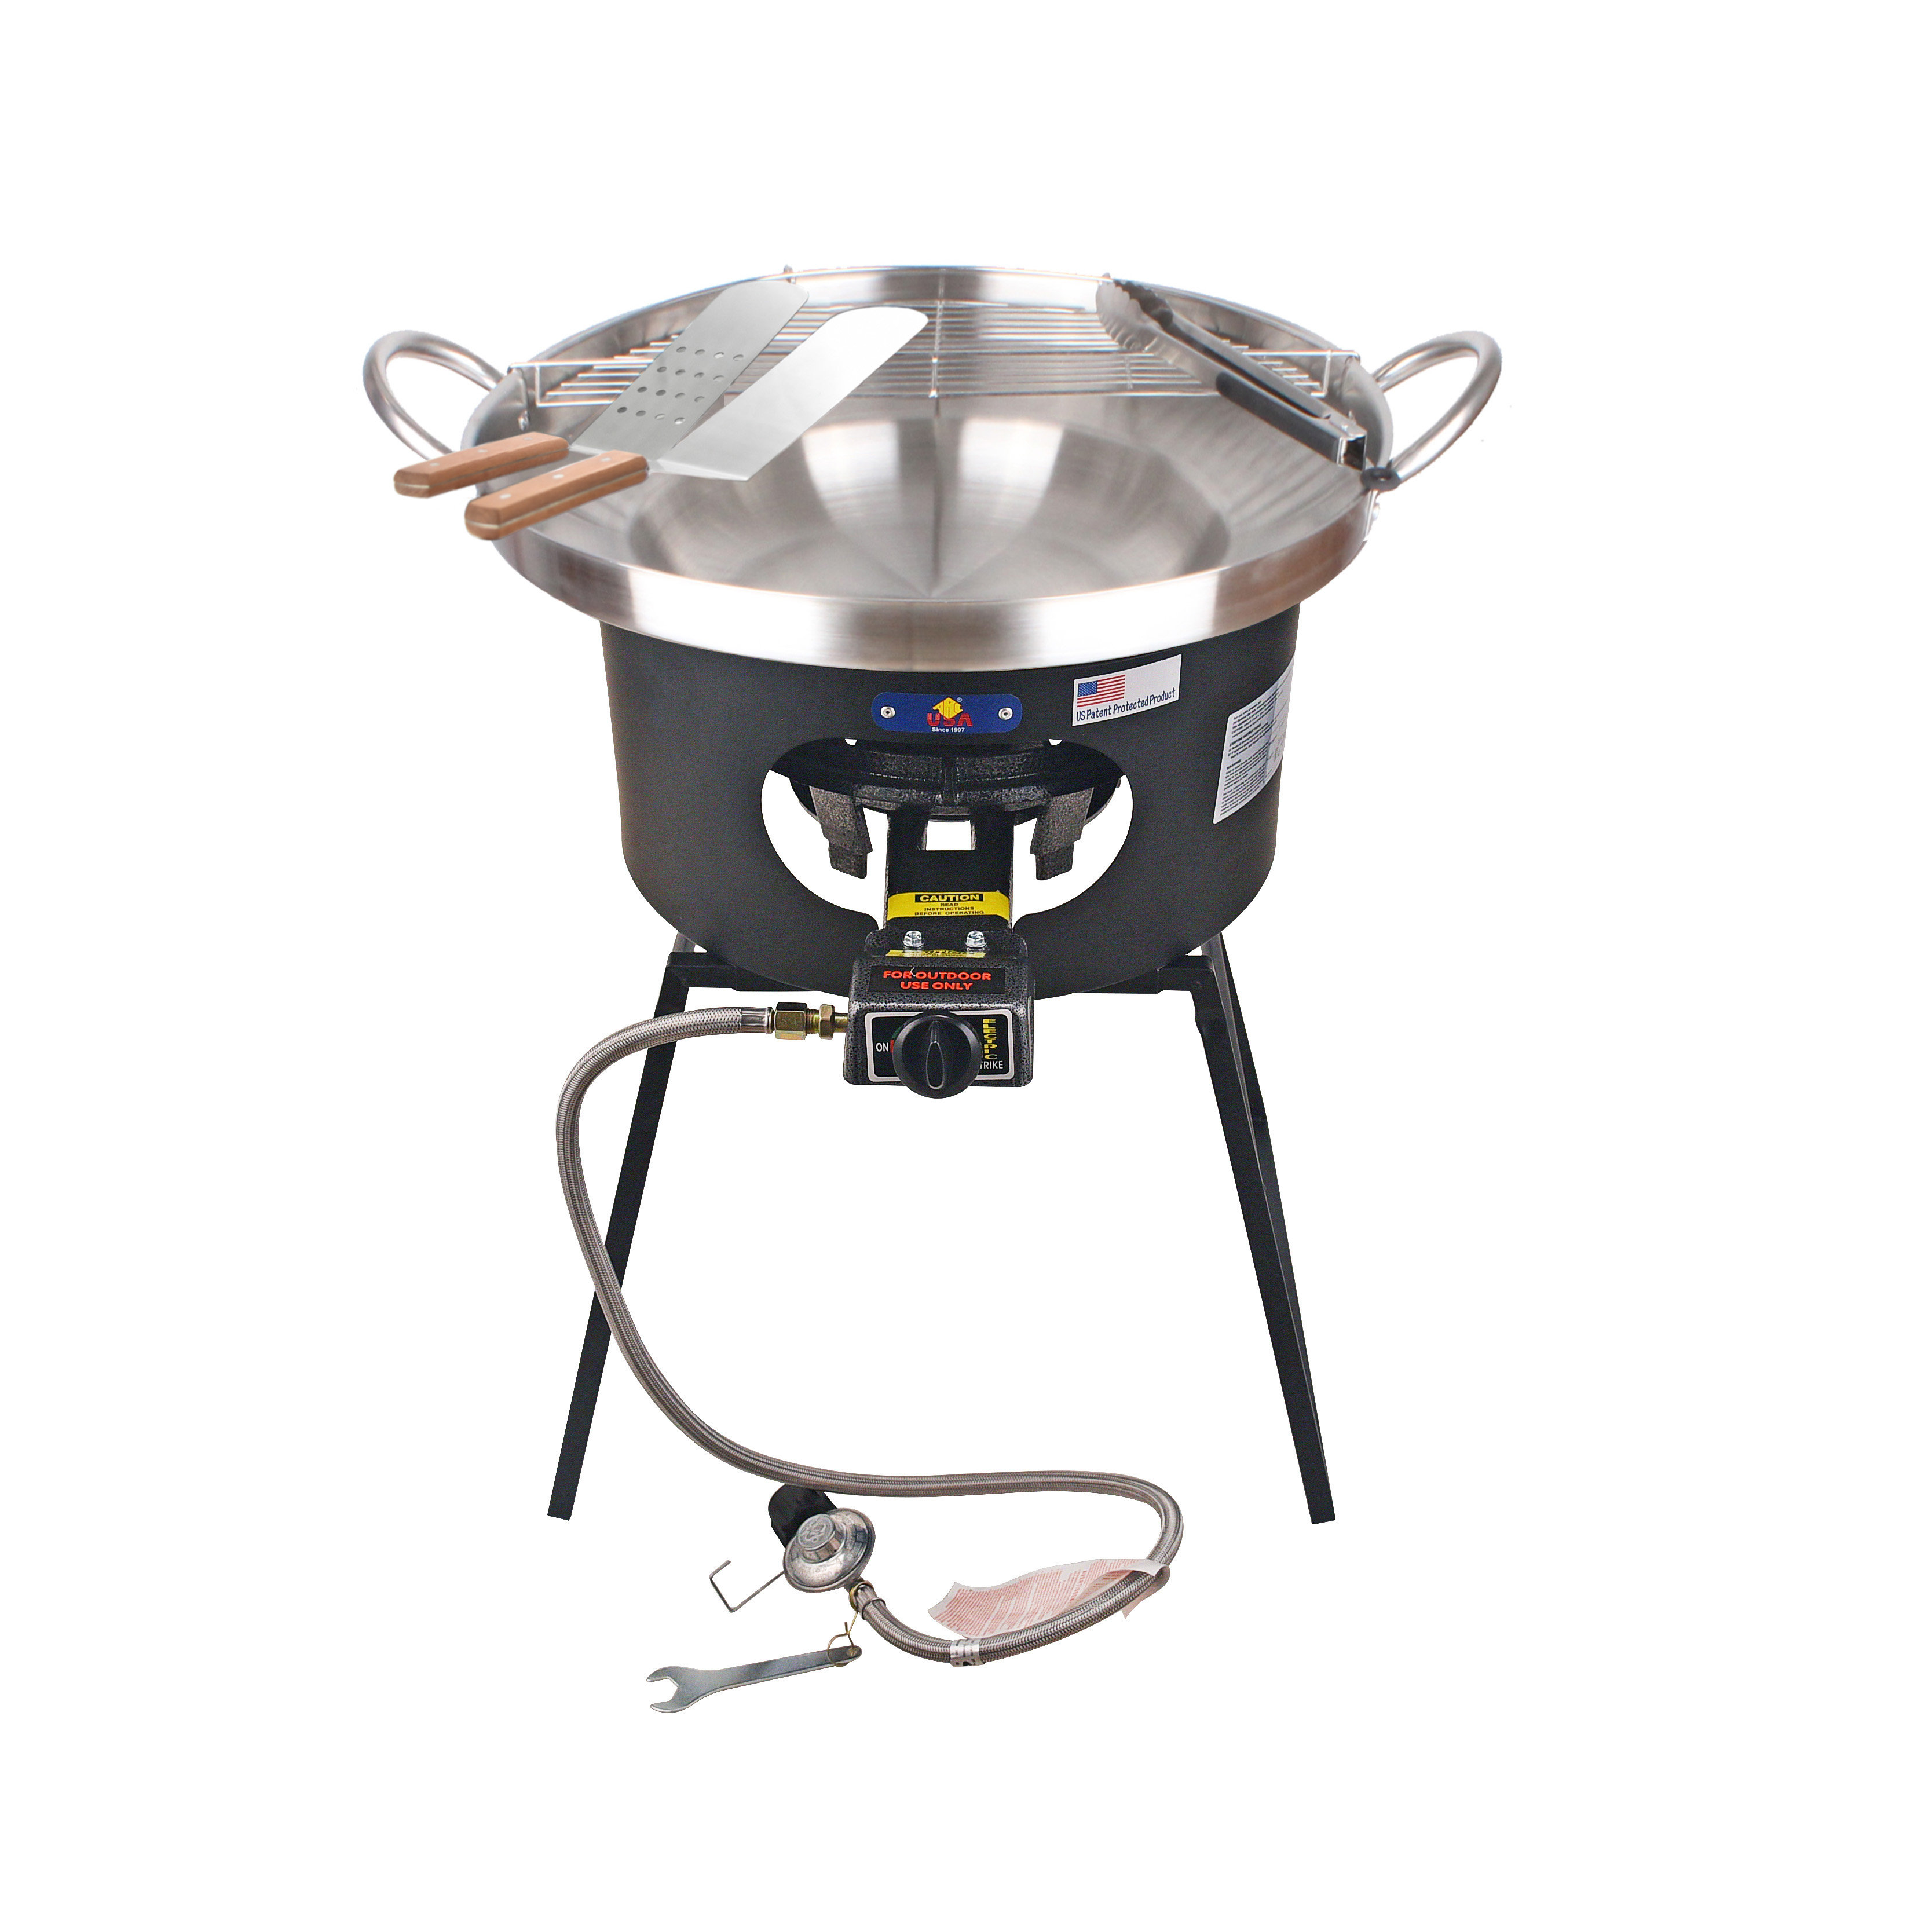 16 Inch Comal Stainless Steel Concave Frying Gas Stove Outdoors